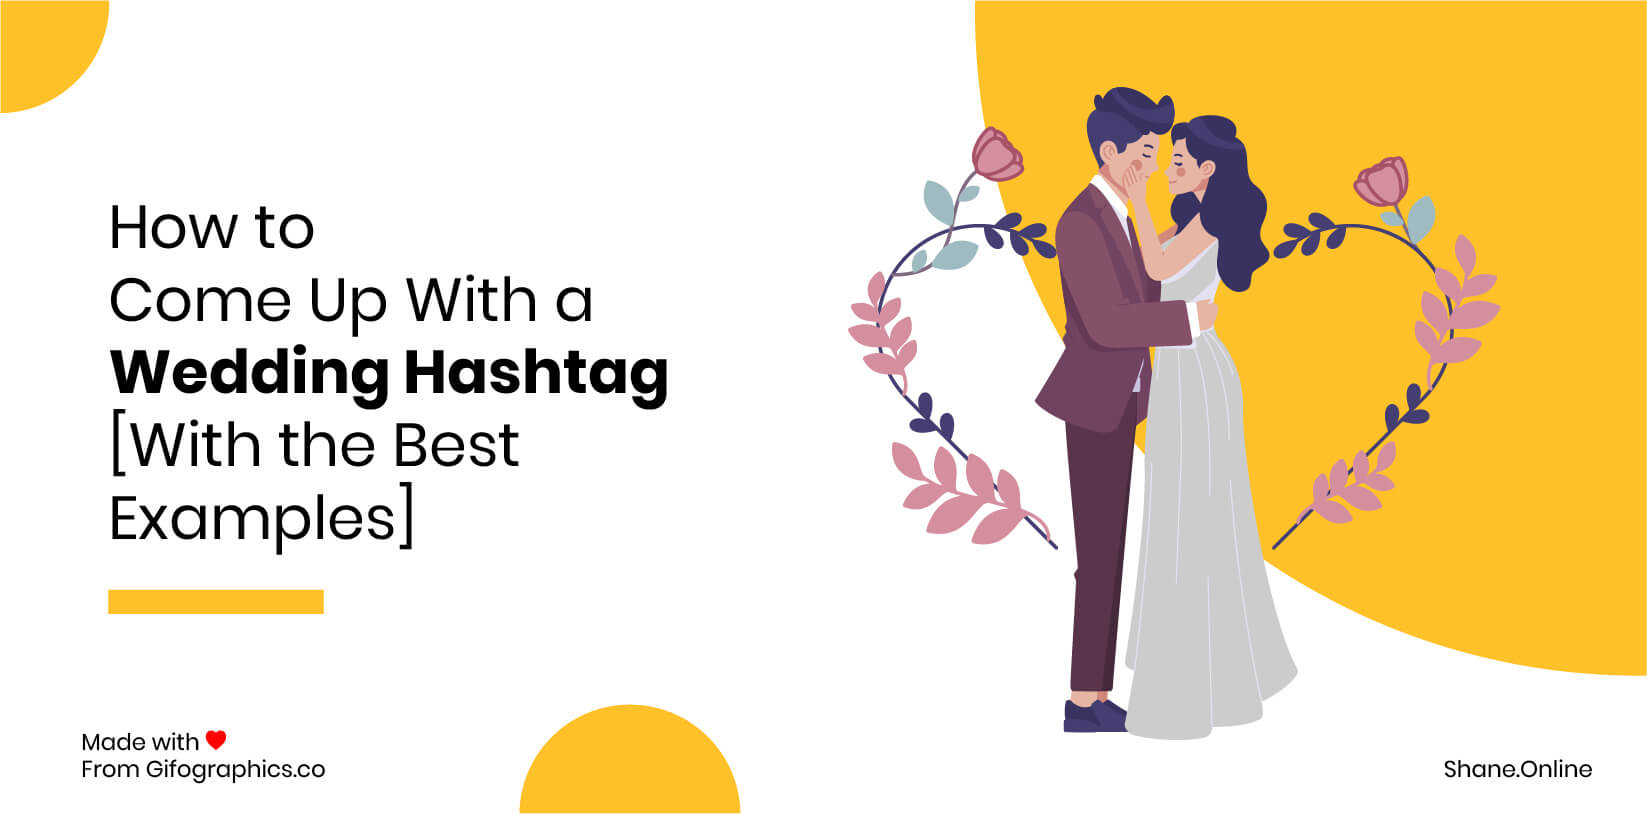 How to Come Up With a Wedding Hashtag [With the Best Examples]